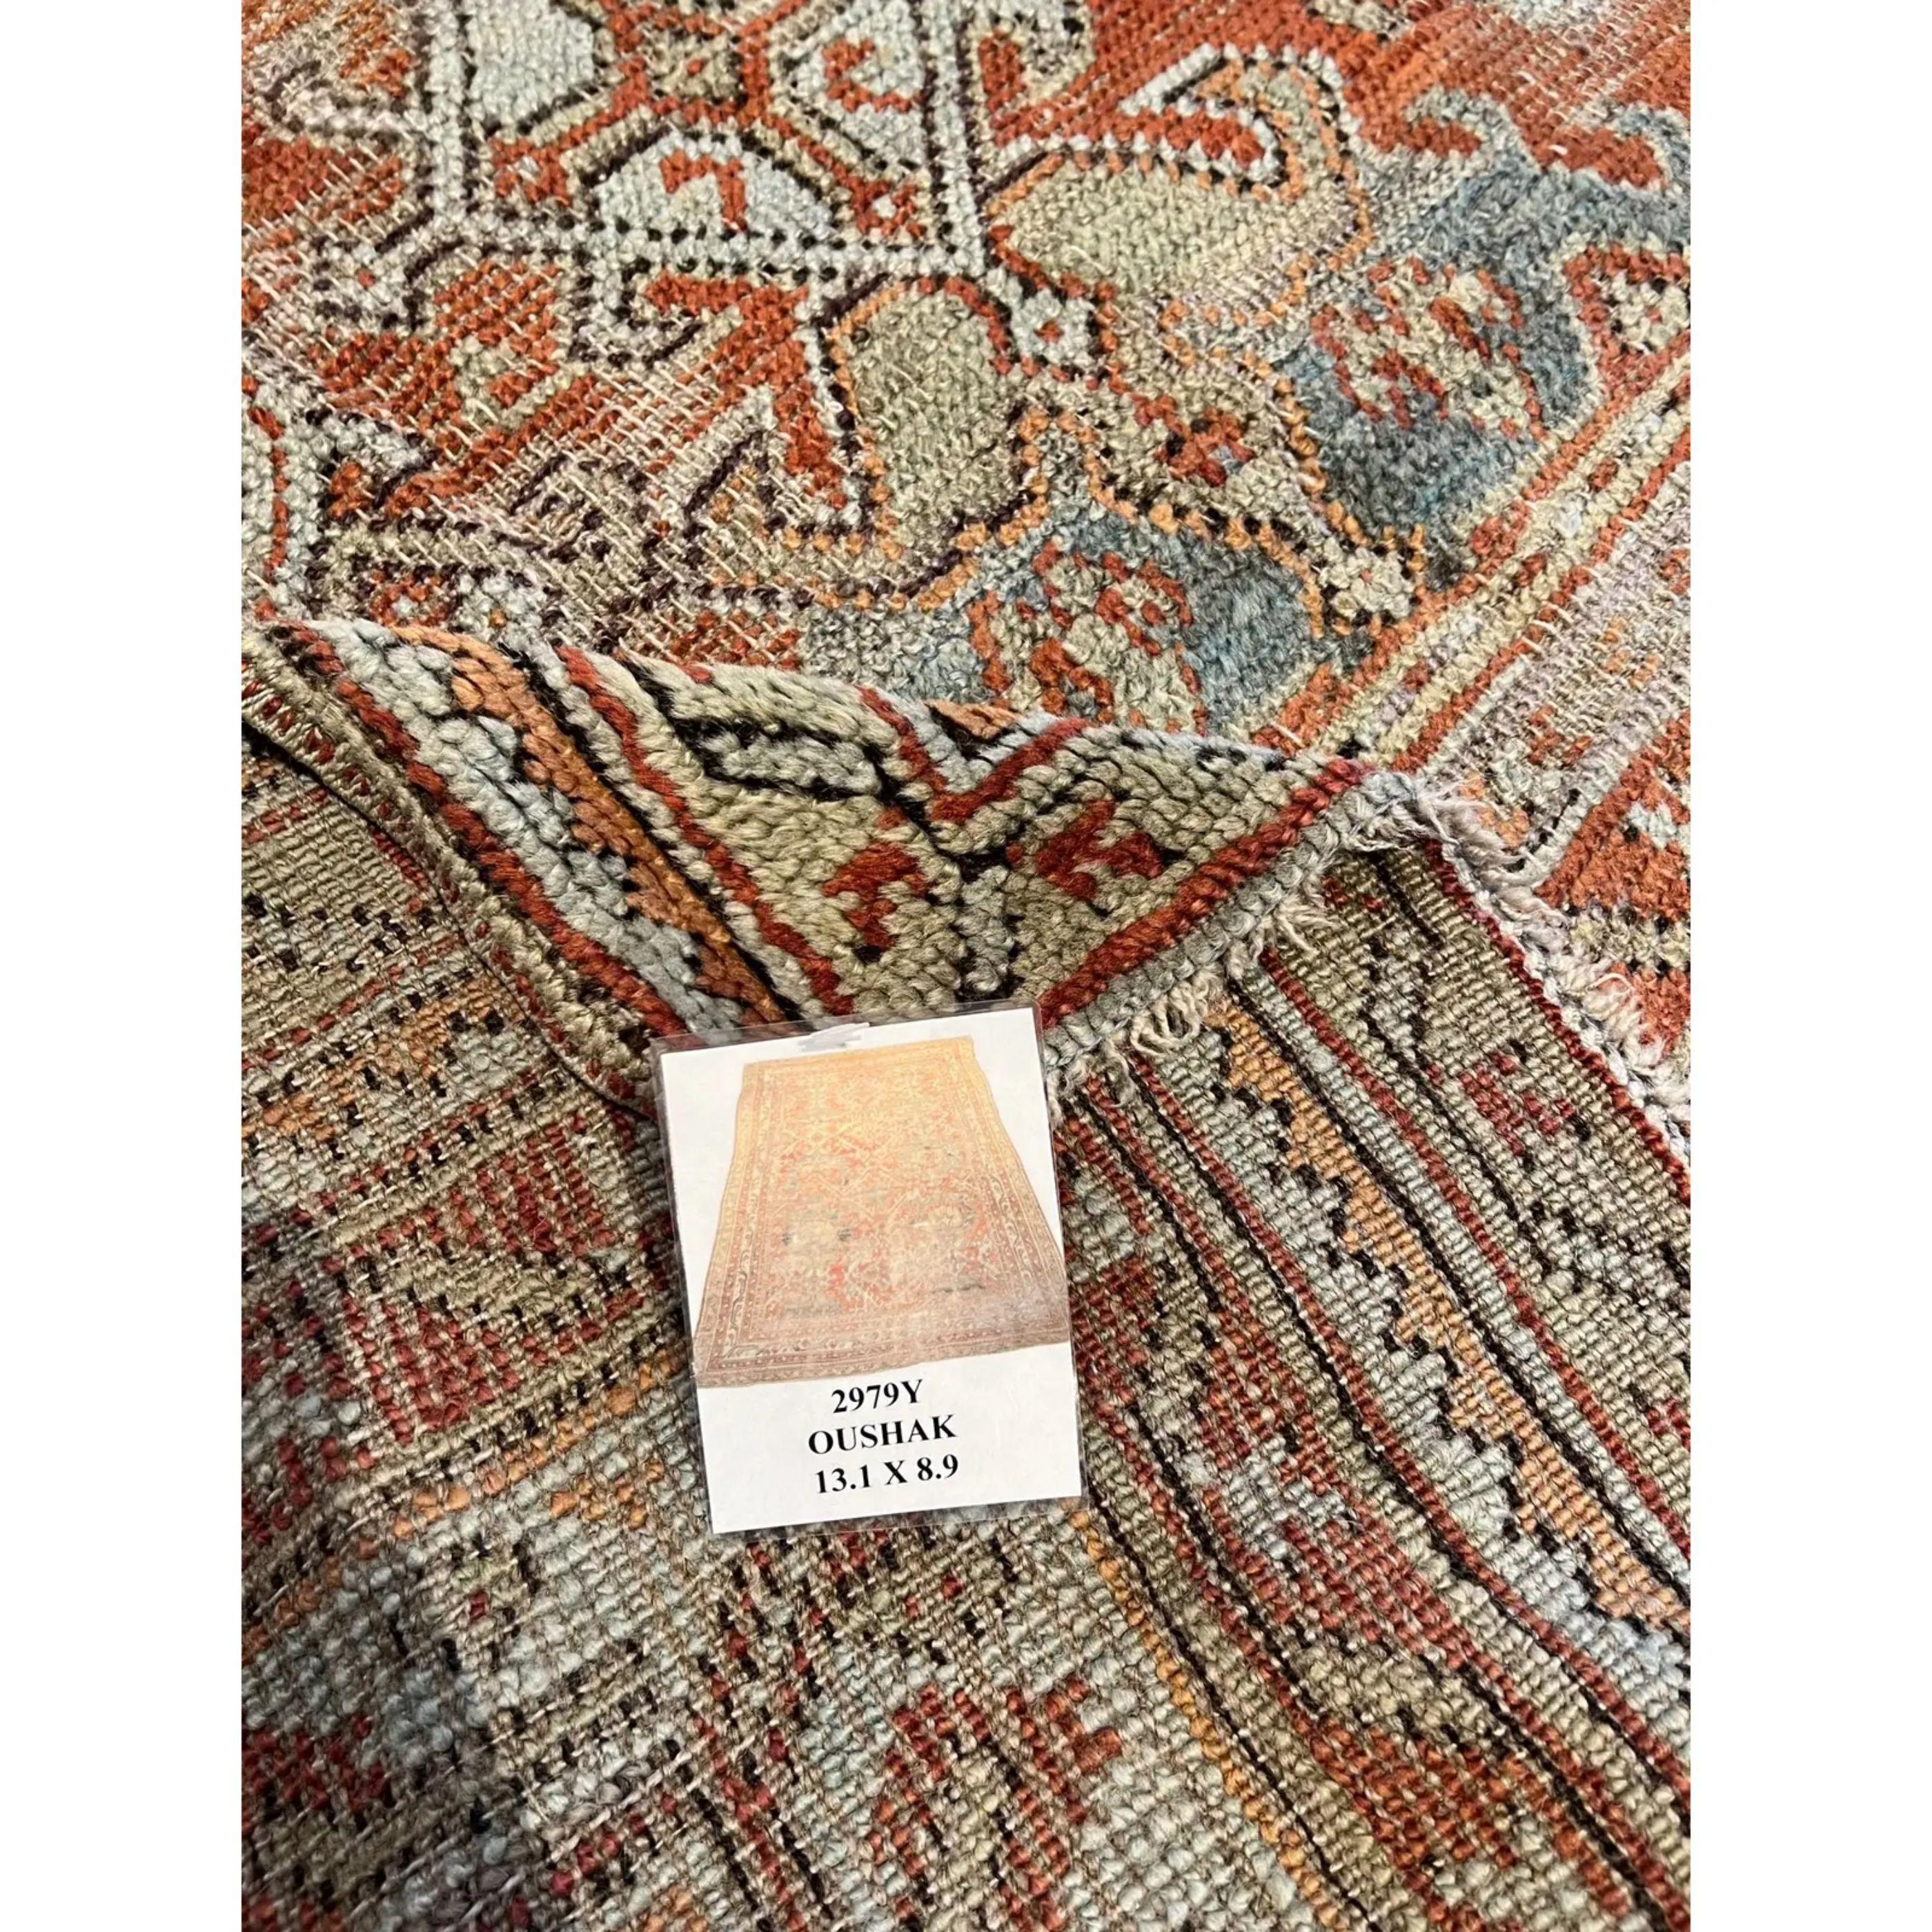 Antique Turkish Oushak rugs have been woven in Western Turkey since the beginning of the Ottoman period. Historians attributed to them many of the great masterpieces of early Turkish carpet weaving from the 15th to the 17th centuries. However, less